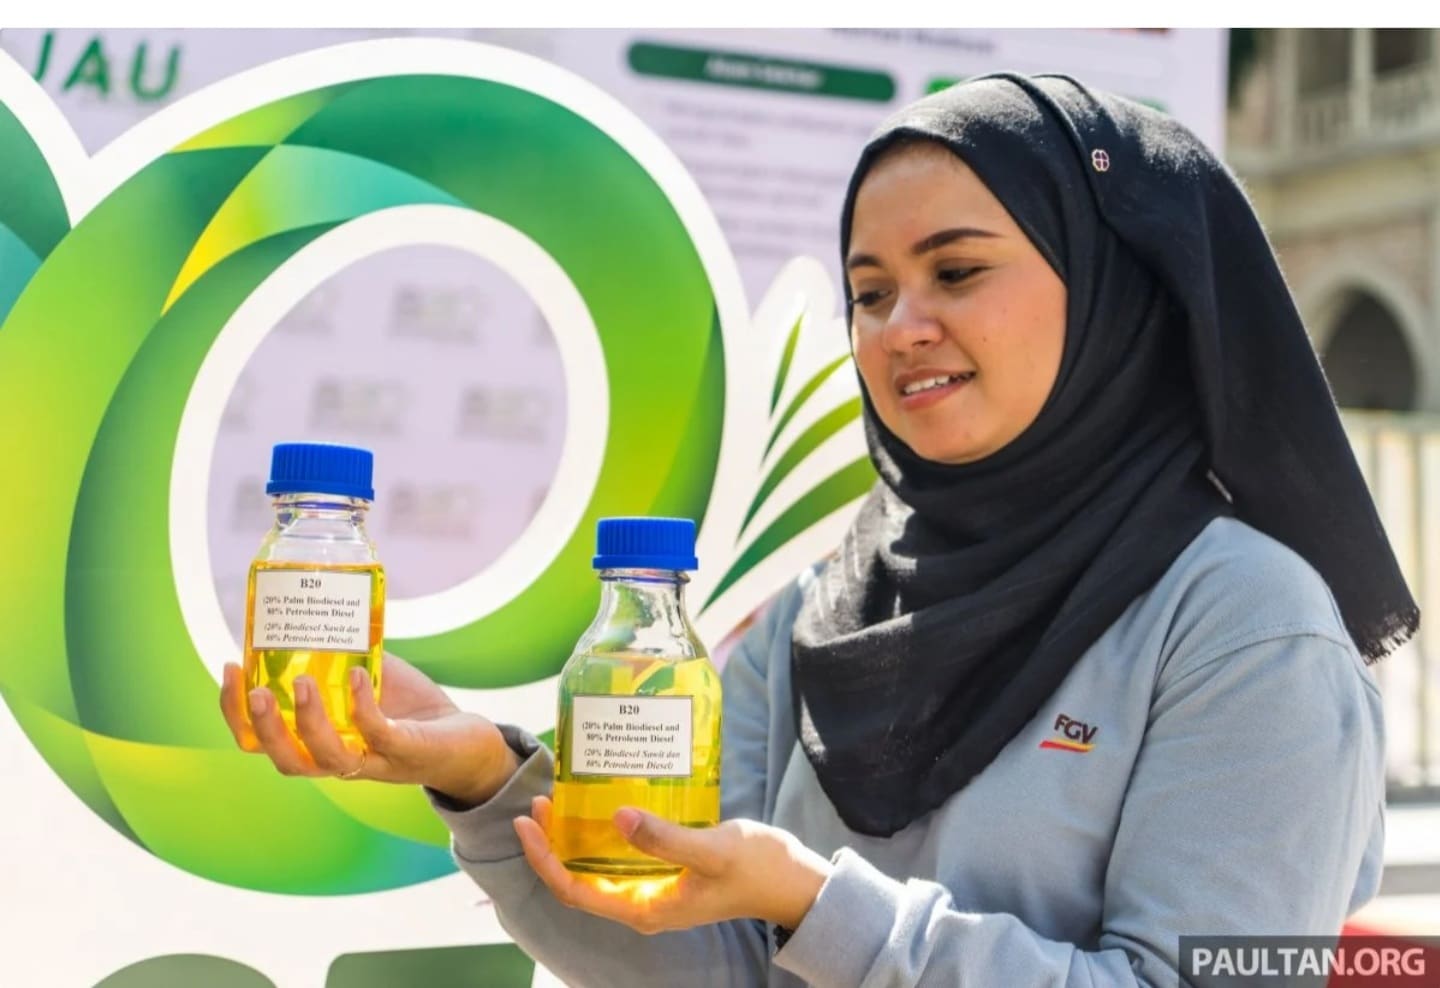 RMK-12: Palm oil-based biodiesel use to be scaled up in Malaysia – B15 and B20 soon, up to B30 by 2025